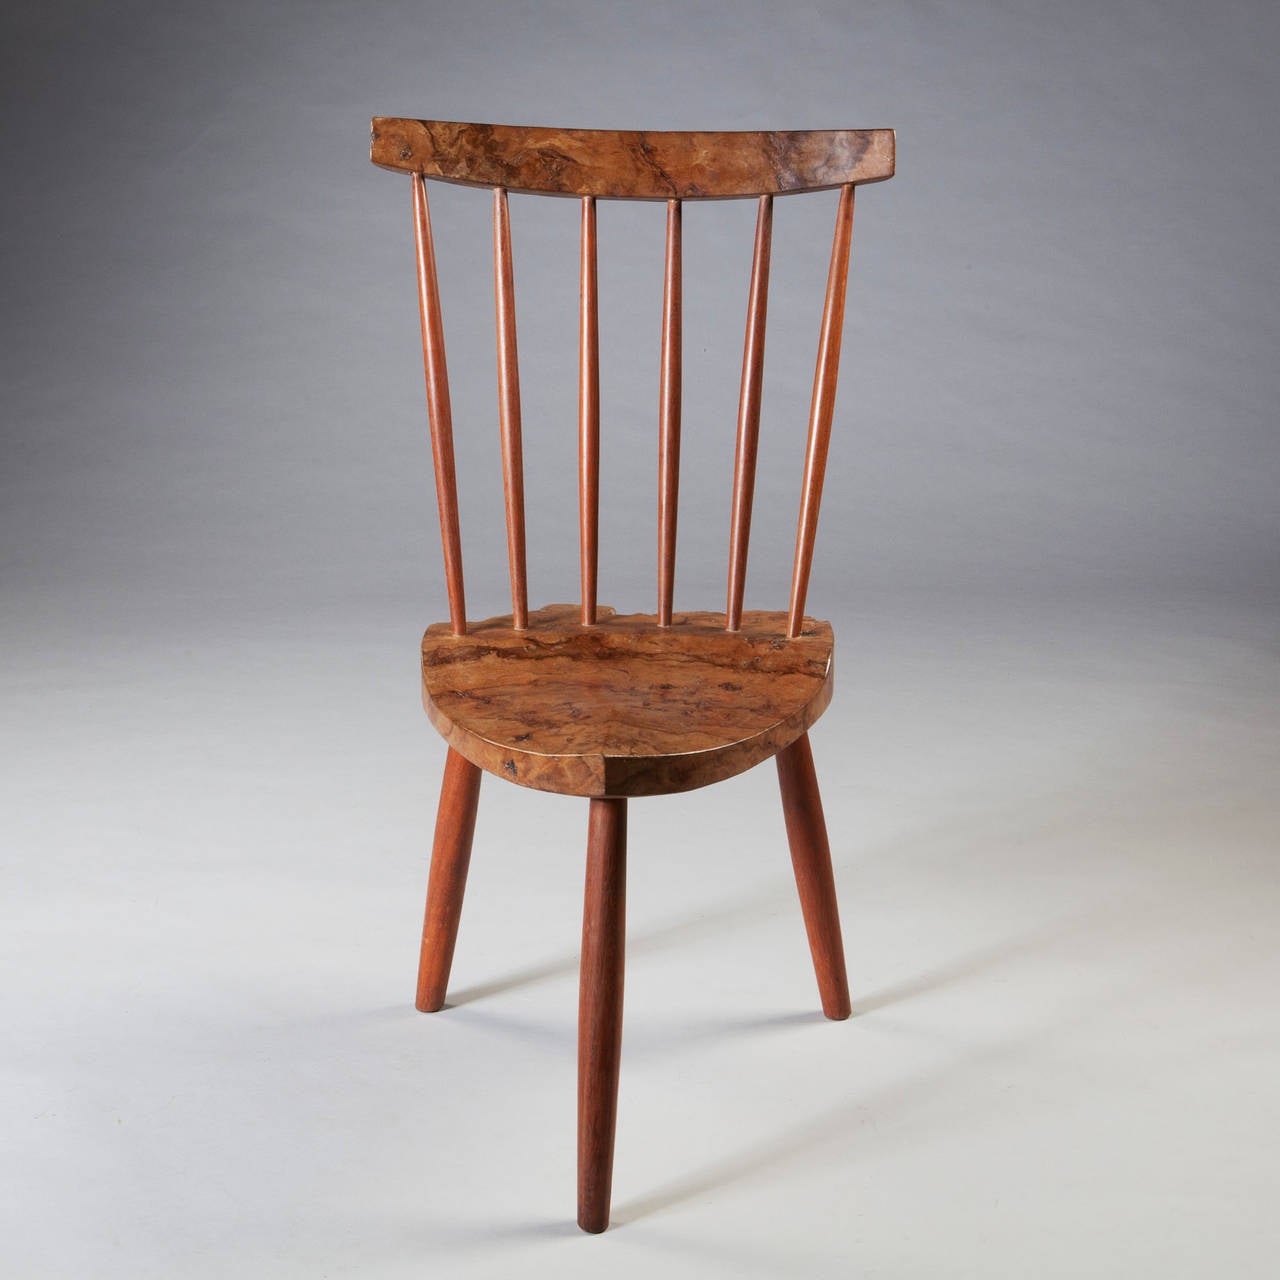 20th Century An Unusual Pair of Burr Walnut Side Chairs, After George Nakashima